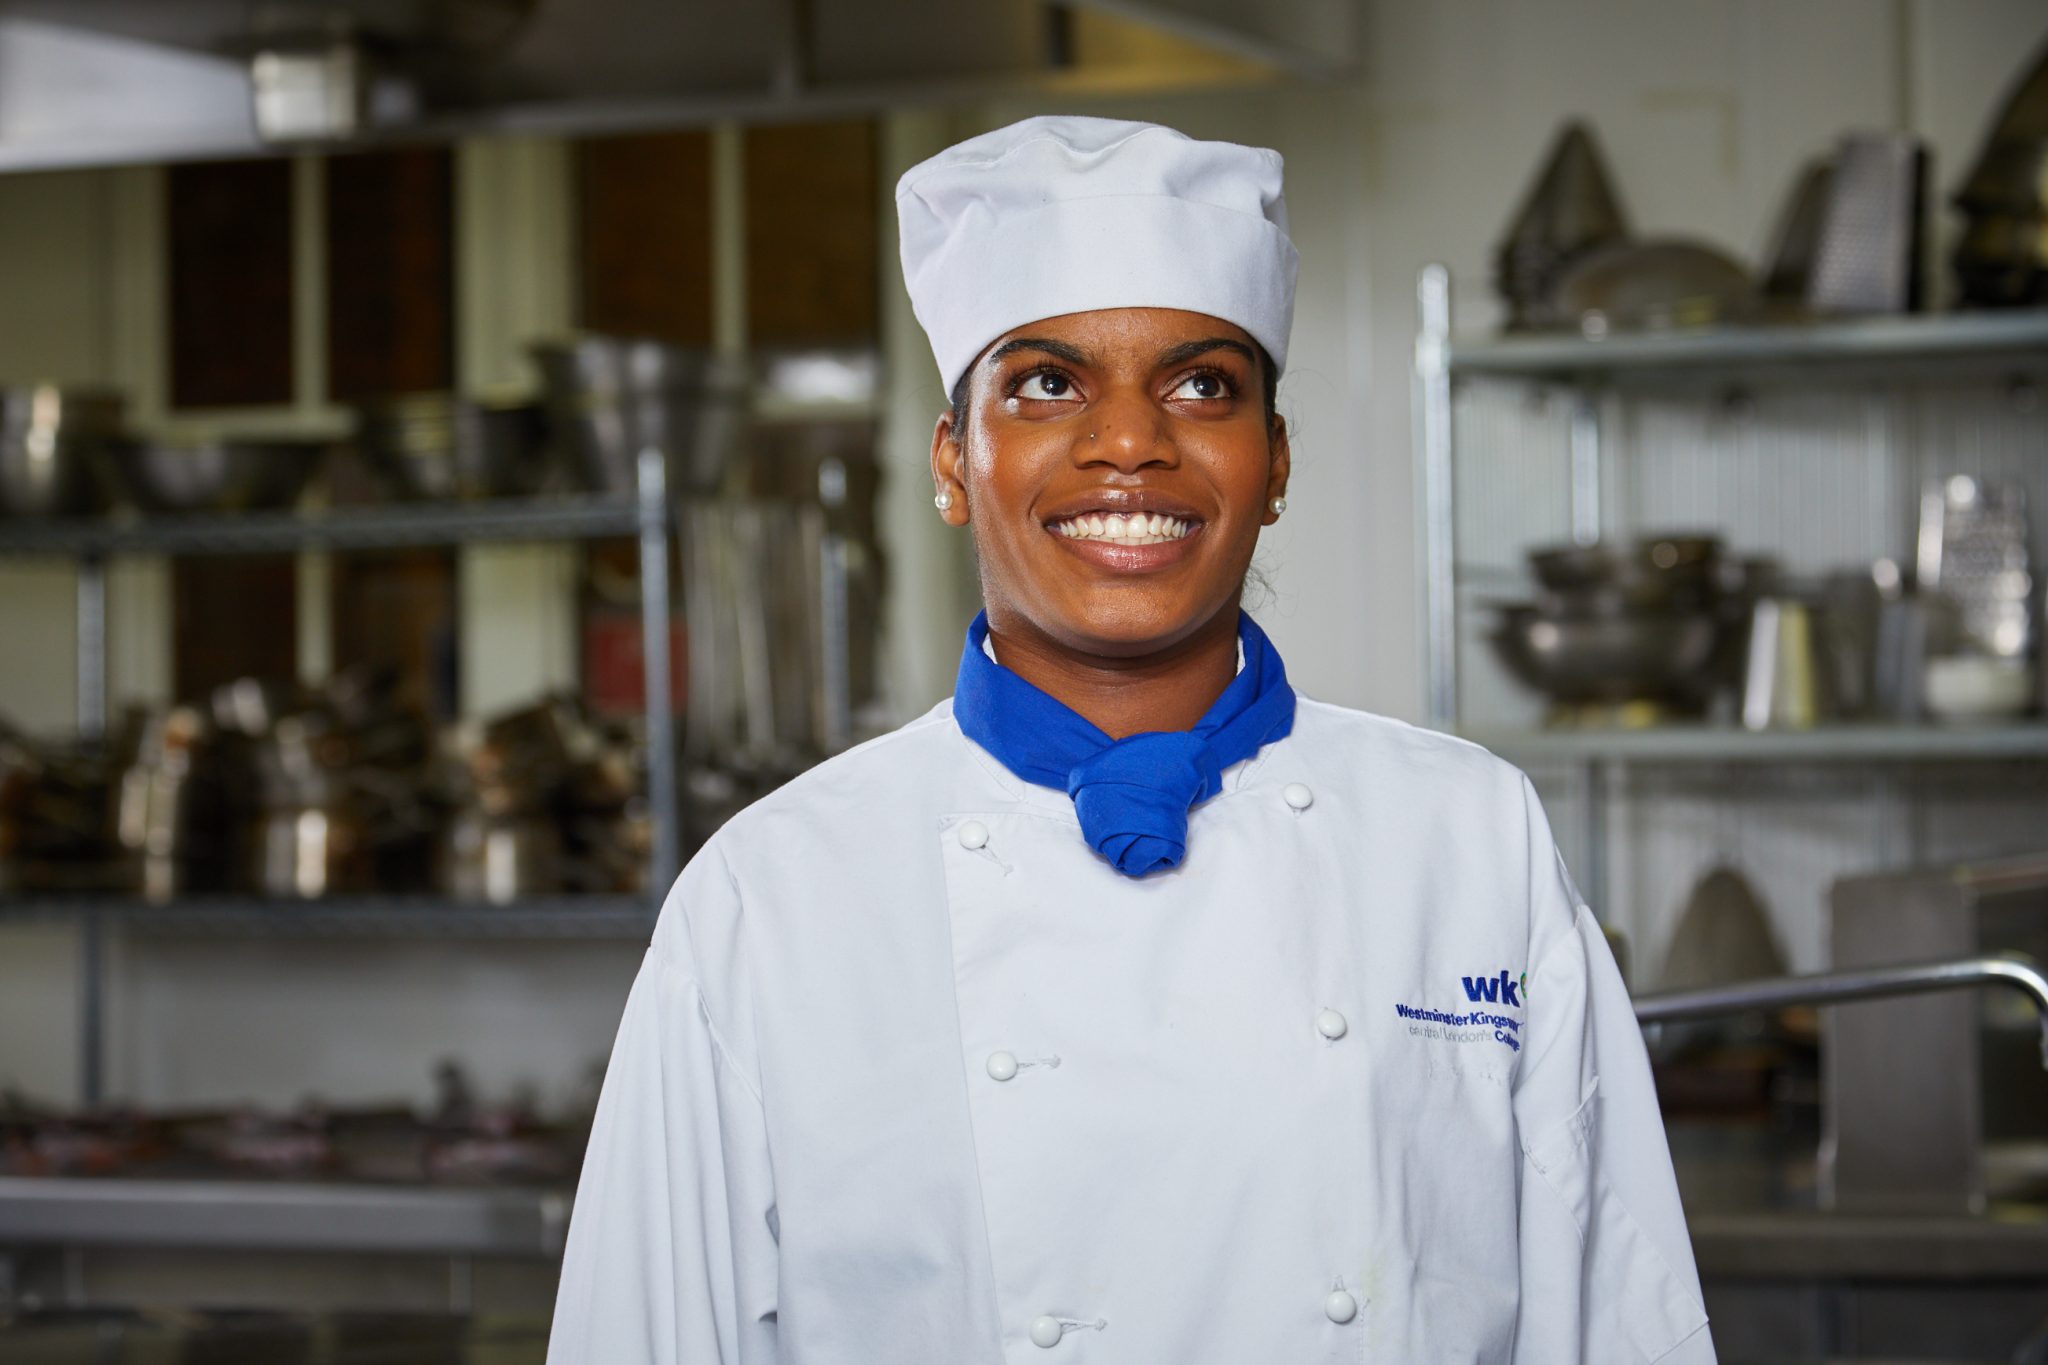 Are you looking for expert training in Hospitality and Culinary Arts?